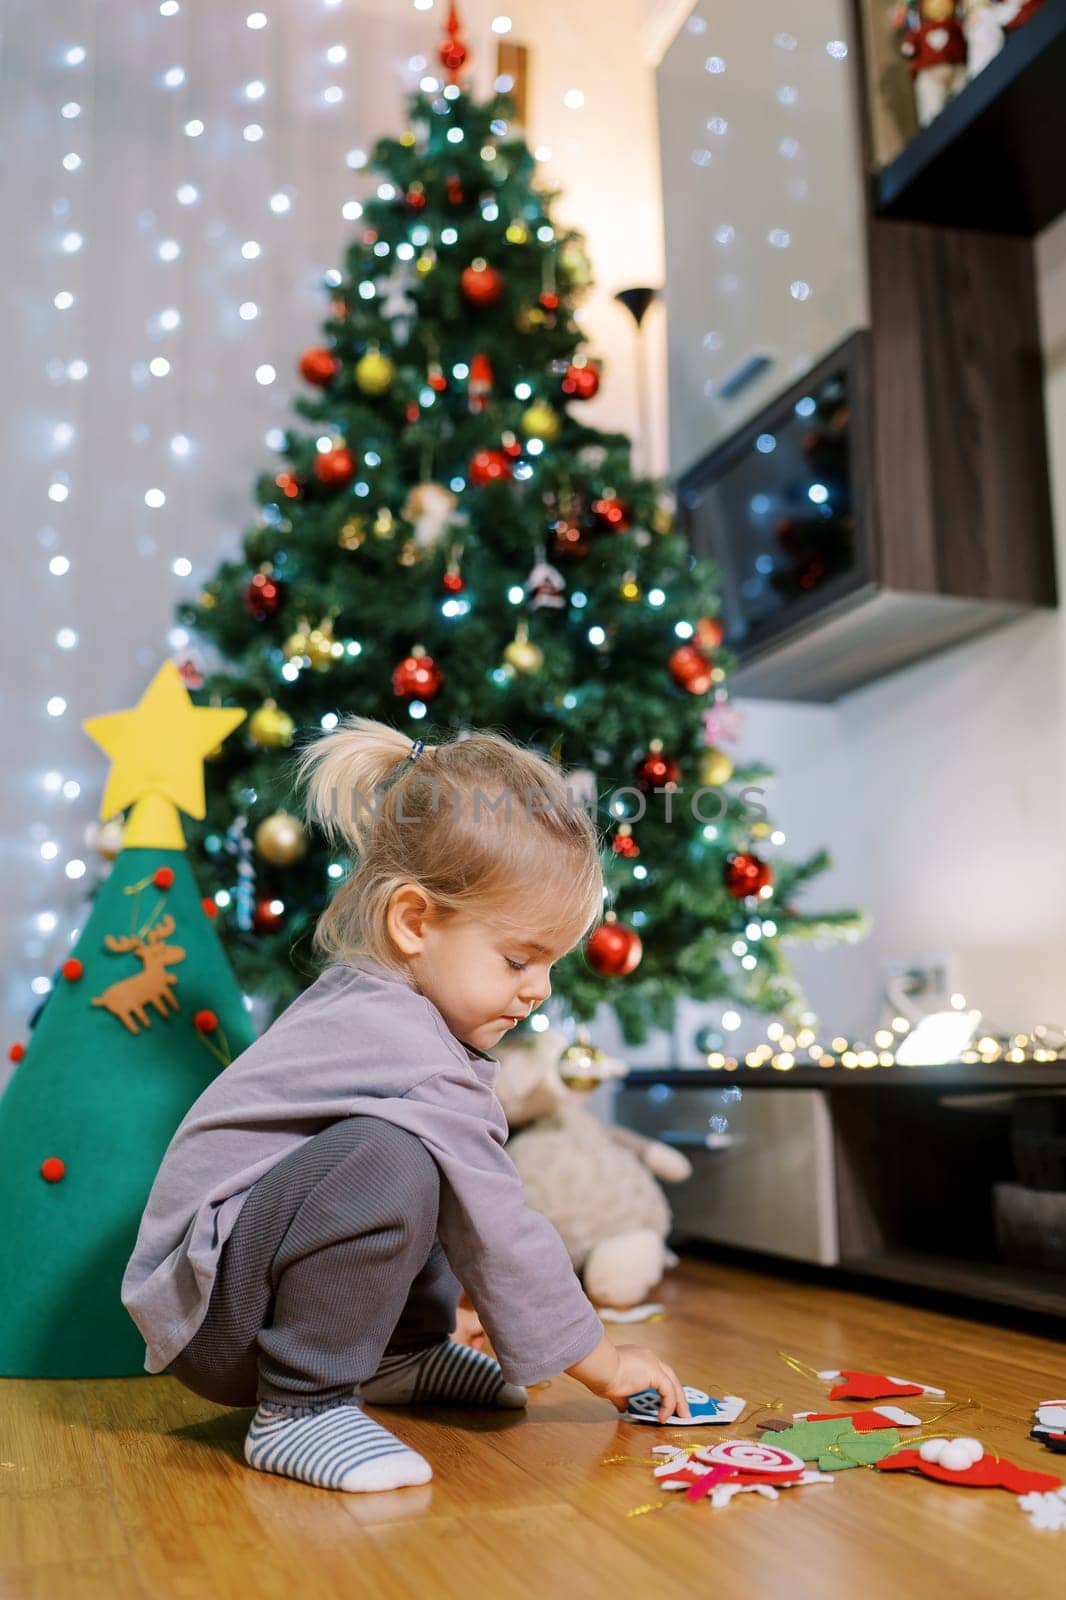 Little girl sorts out toys for a felt Christmas tree while squatting by Nadtochiy